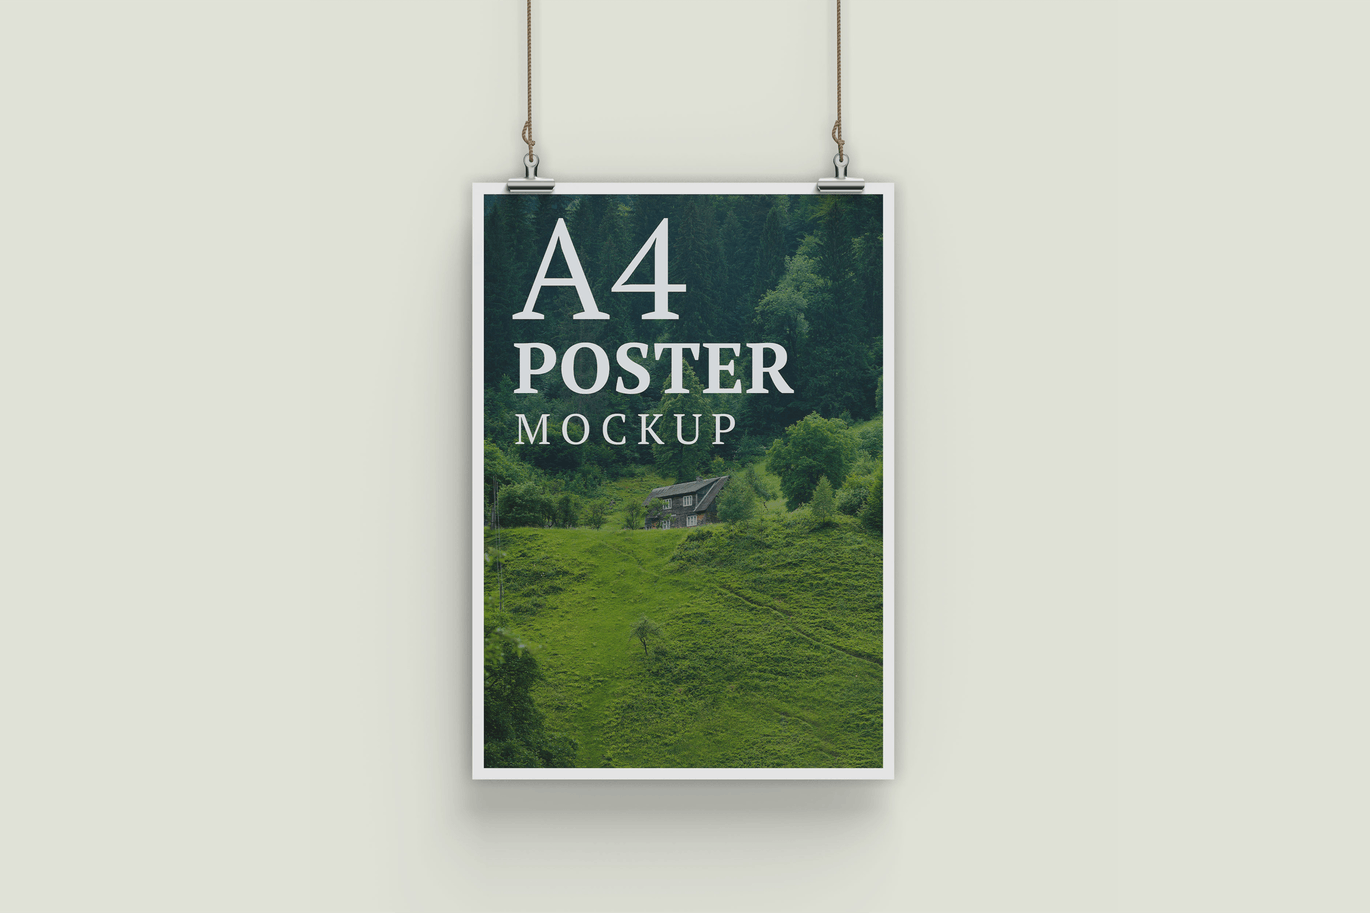 A4 Poster Mockup Front Angle View